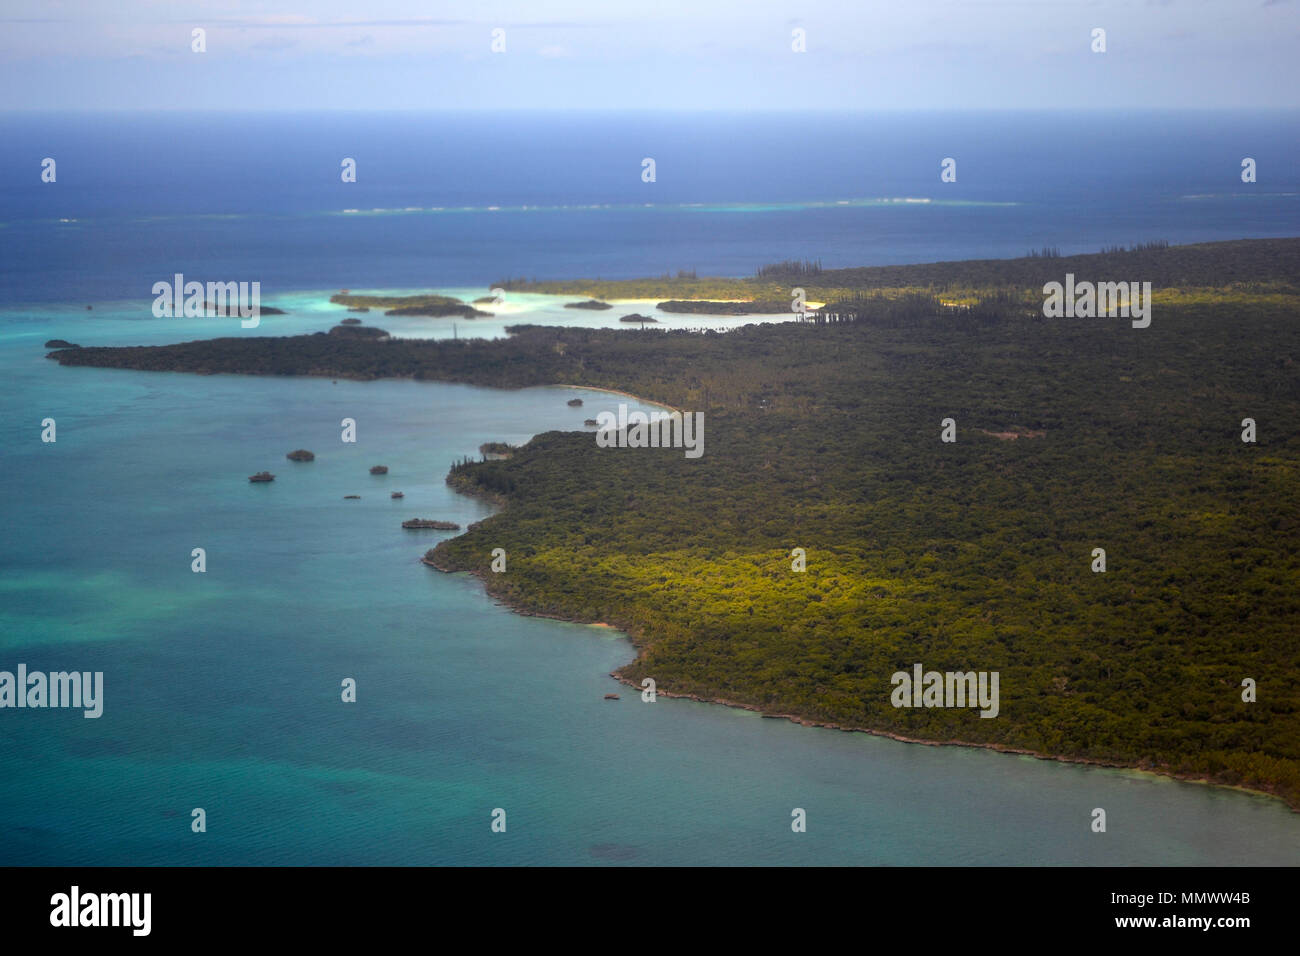 Aerial view of the coastline at the Isle of Pines, New Caledonia, South Pacific Stock Photo